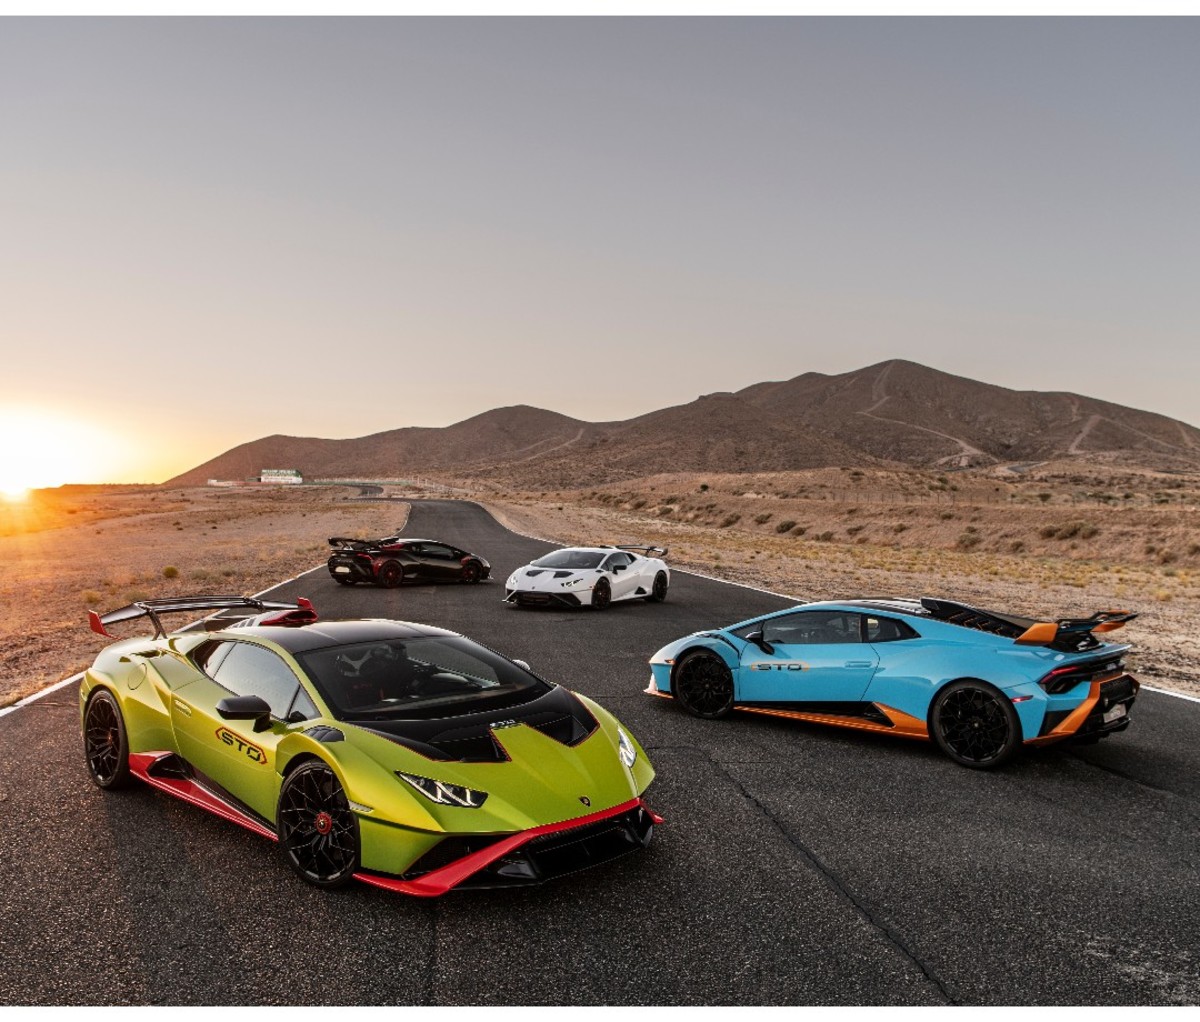 Four 2021 Lamborghini Huracán STOs parked on a race track at sunset. Colors: green, blue, white and black